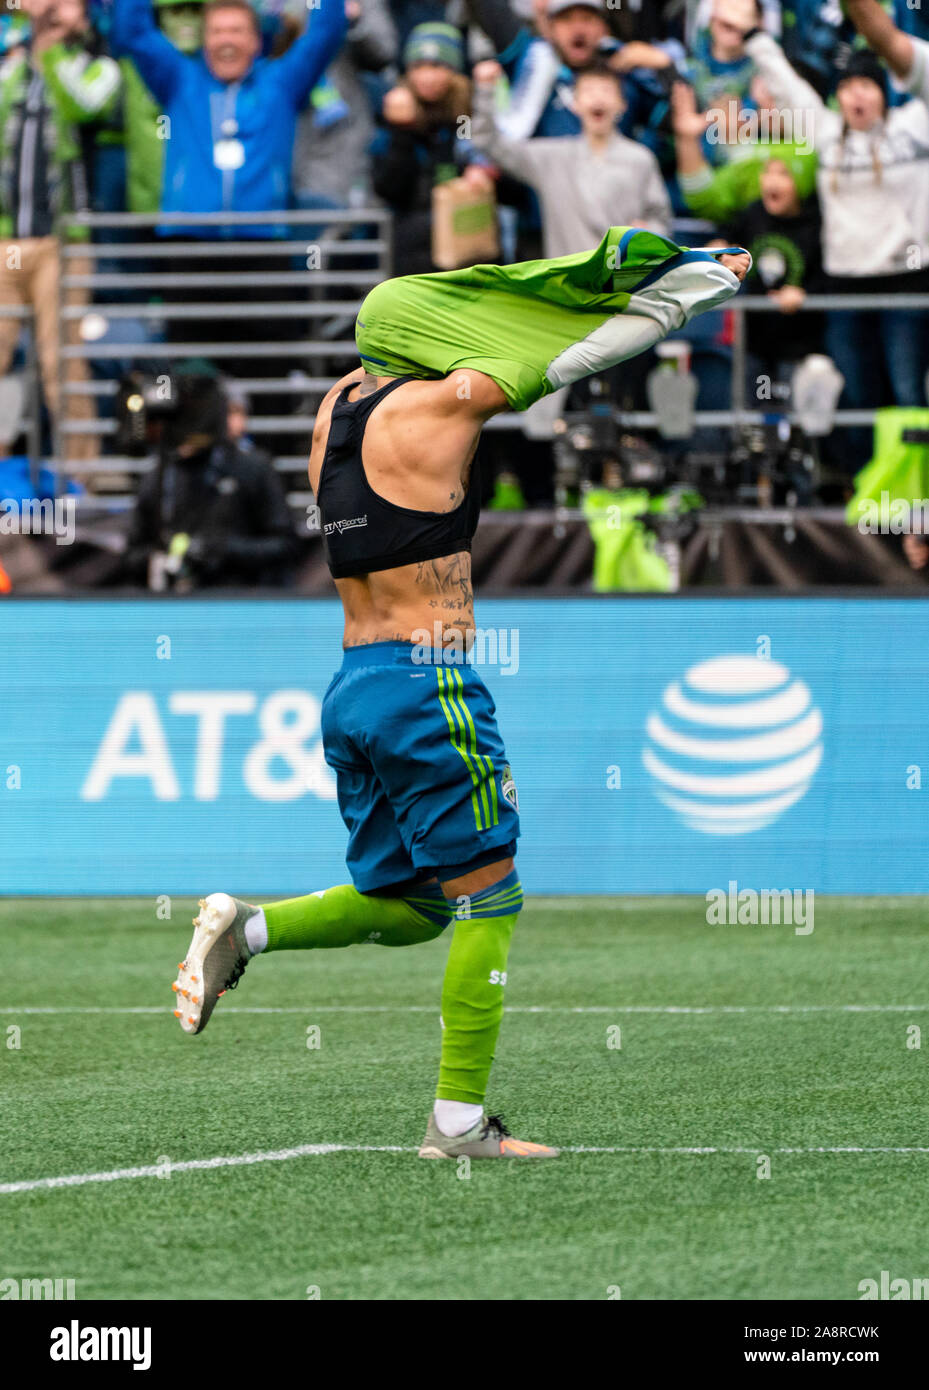 Seattle, USA. 10th Nov, 2019. Raul Ruidiaz (9) celebrates after scoring Seattle's third goal of the game in 90th minute as the Sounders cruised past Toronto to win the MLS Cup. Credit: Ben Nichols/Alamy Live News Stock Photo